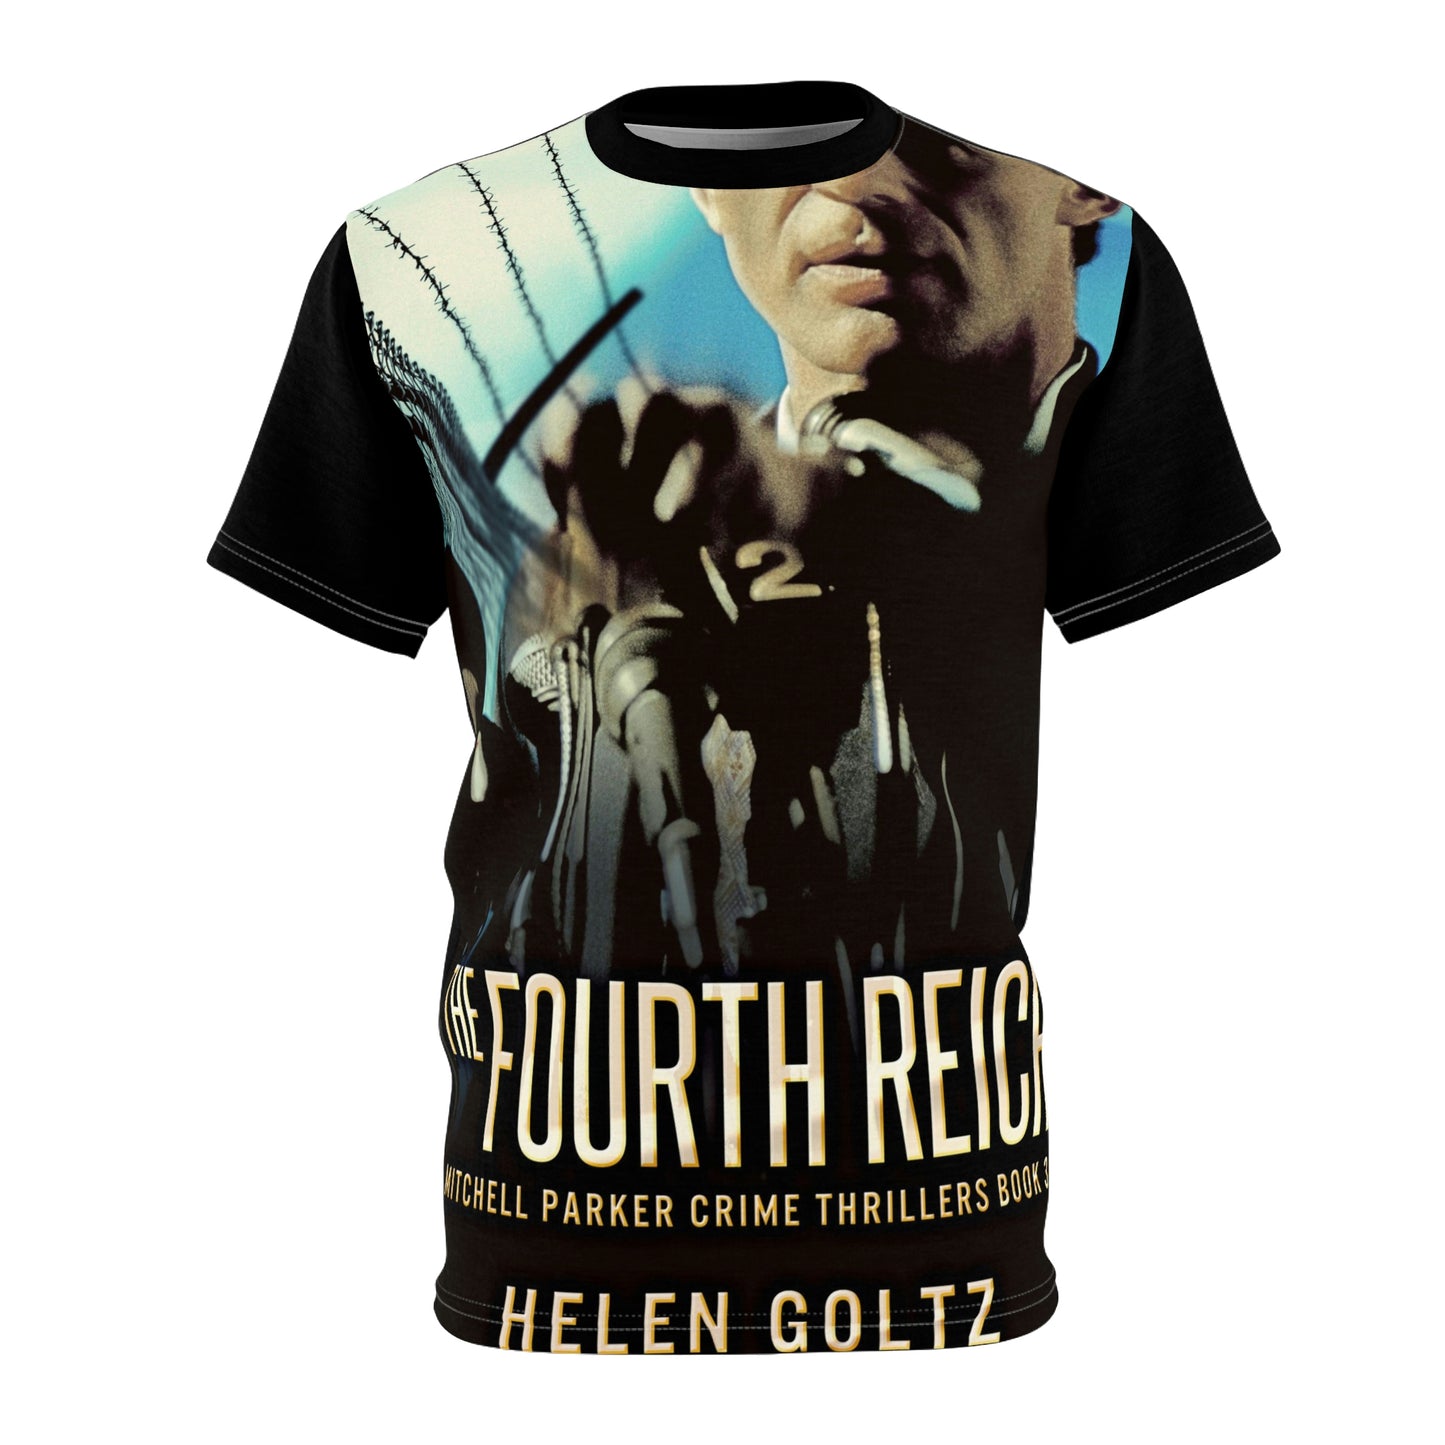 The Fourth Reich - Unisex All-Over Print Cut & Sew T-Shirt